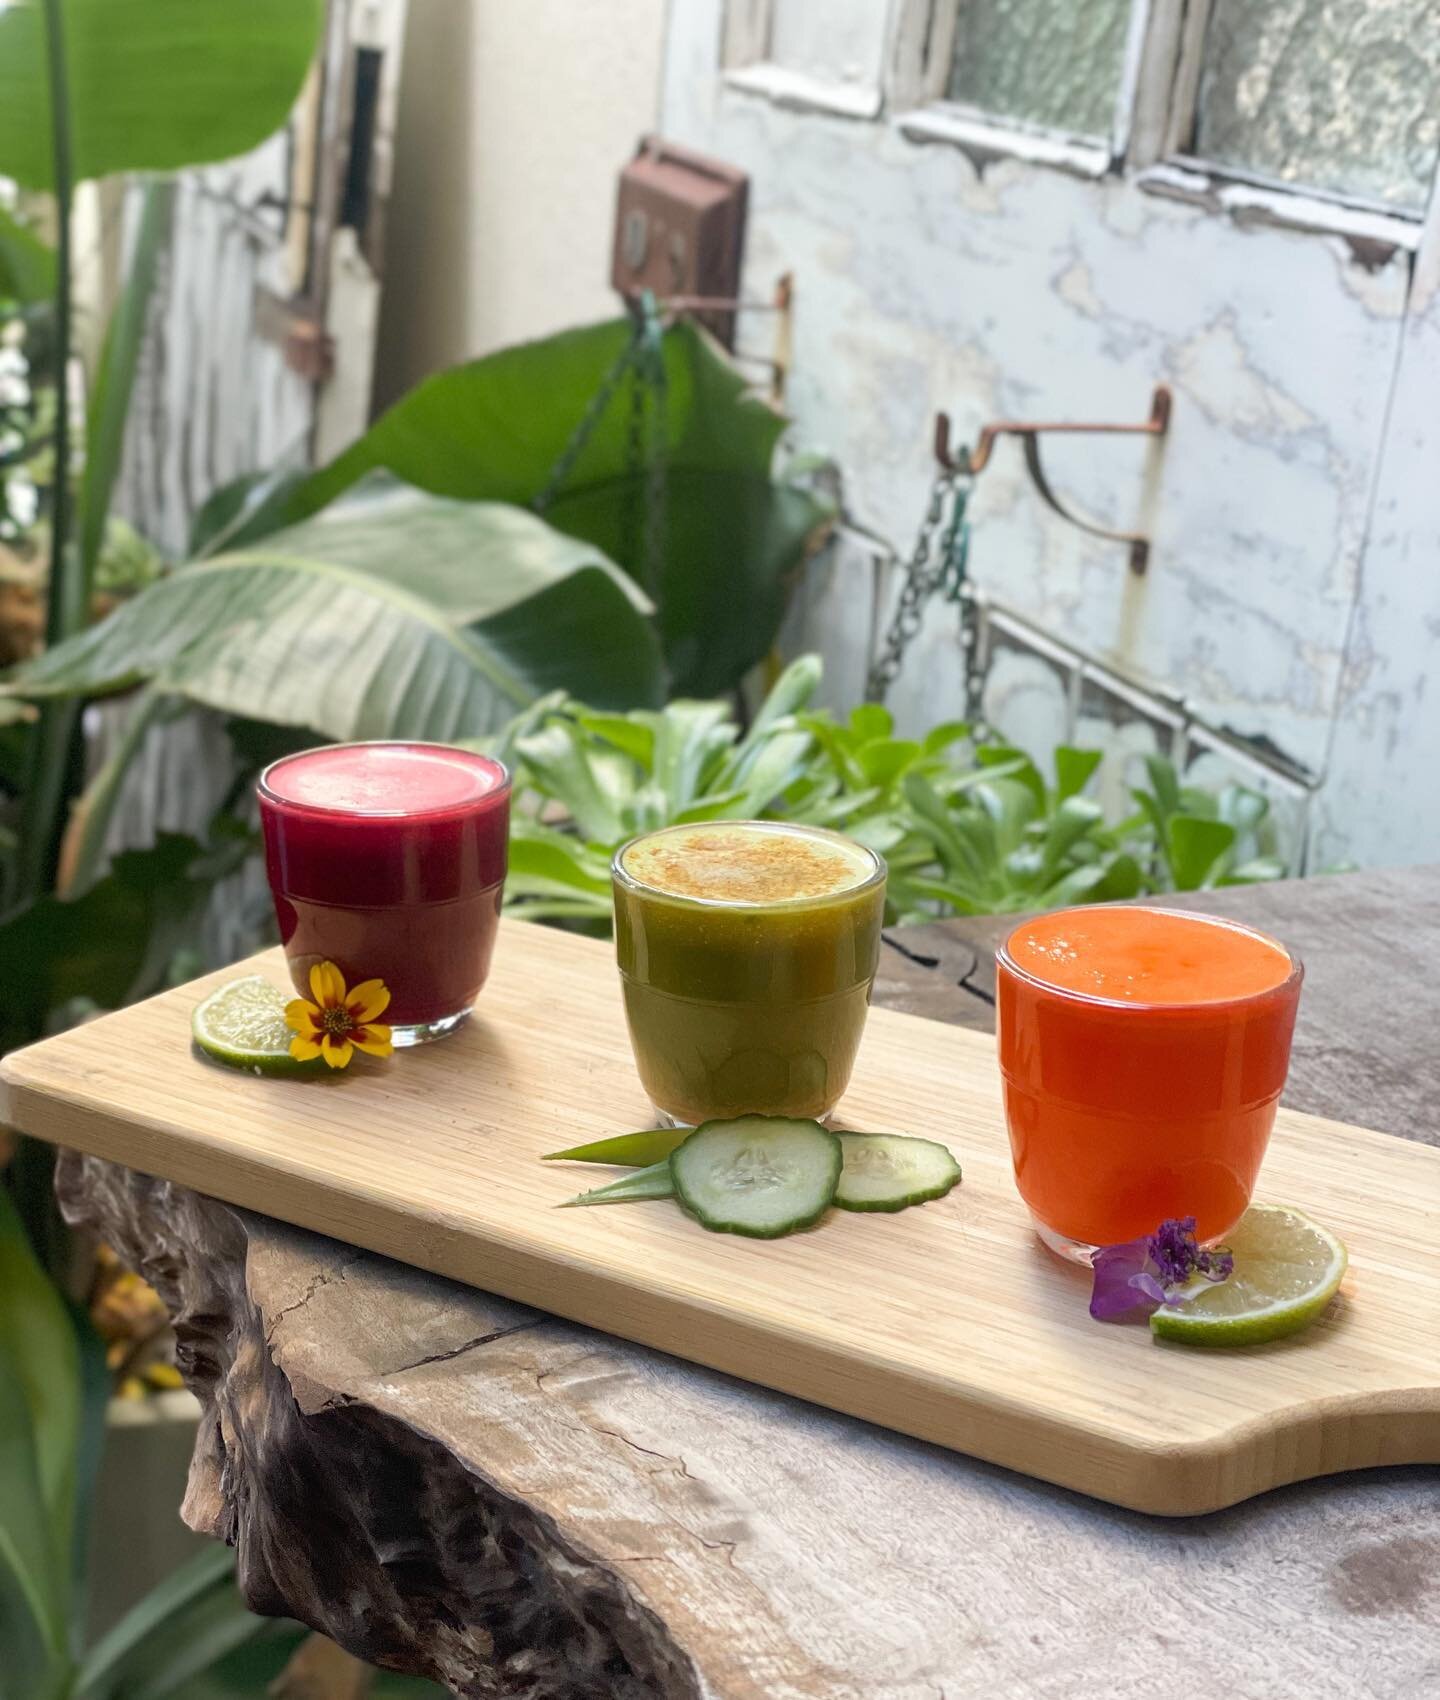 SUNDAY: A day to relax, rewind and reflect before a new week begins!

Why not try our trio of wellness shots? Energise, cleanse and restore your senses. We&rsquo;ve got you 🧡💚💜
&bull;
&bull;
&bull;
&bull;
#AlimentaryEatery #Wellness #SundayVibes #